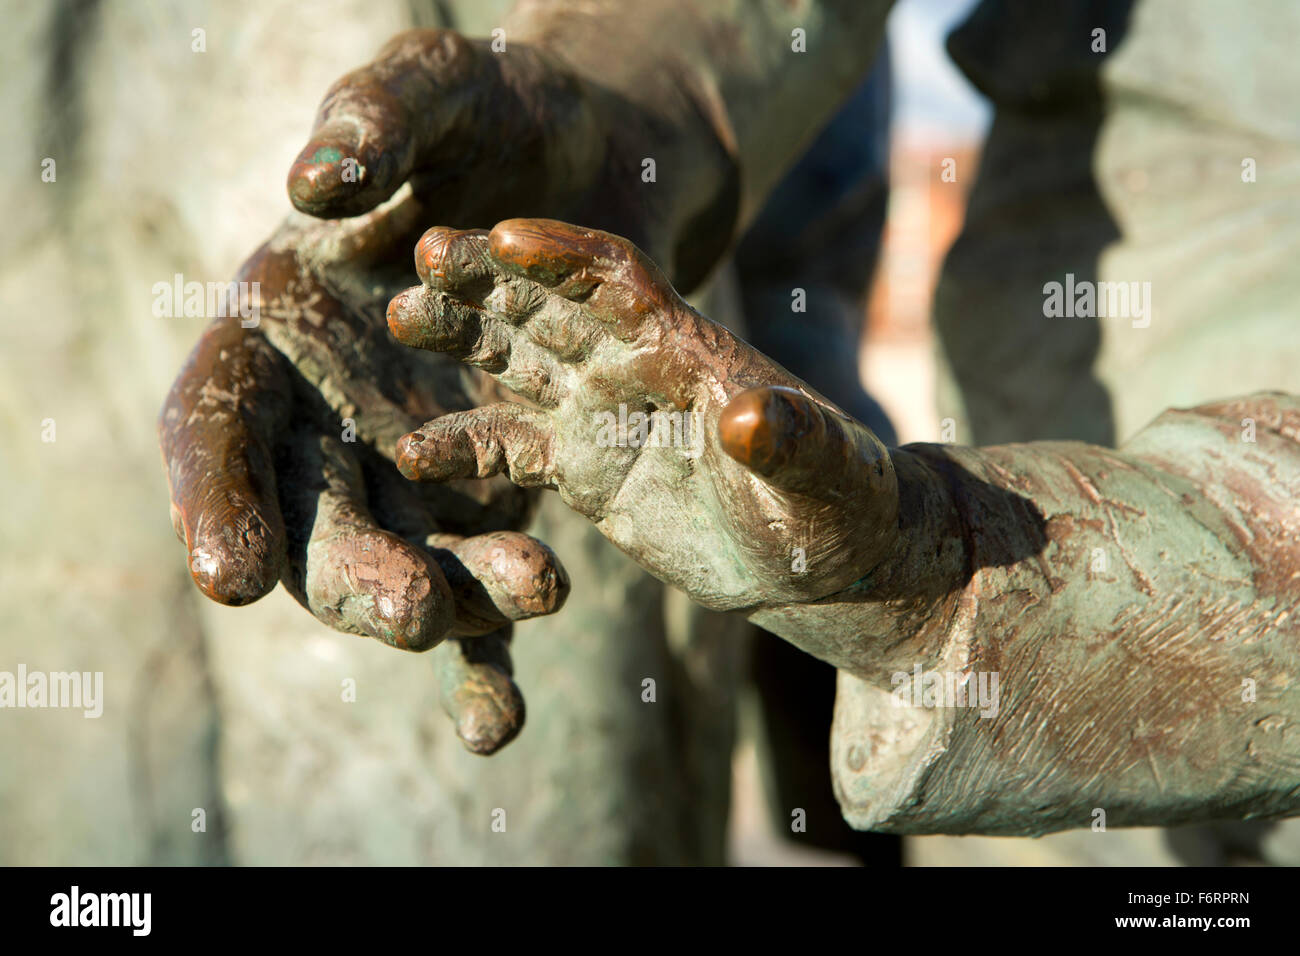 UK, England, Yorkshire, Hull, Humber Quays, bronze adult and child’s hands of Neil Hadlock’s emigrants sculpture Stock Photo